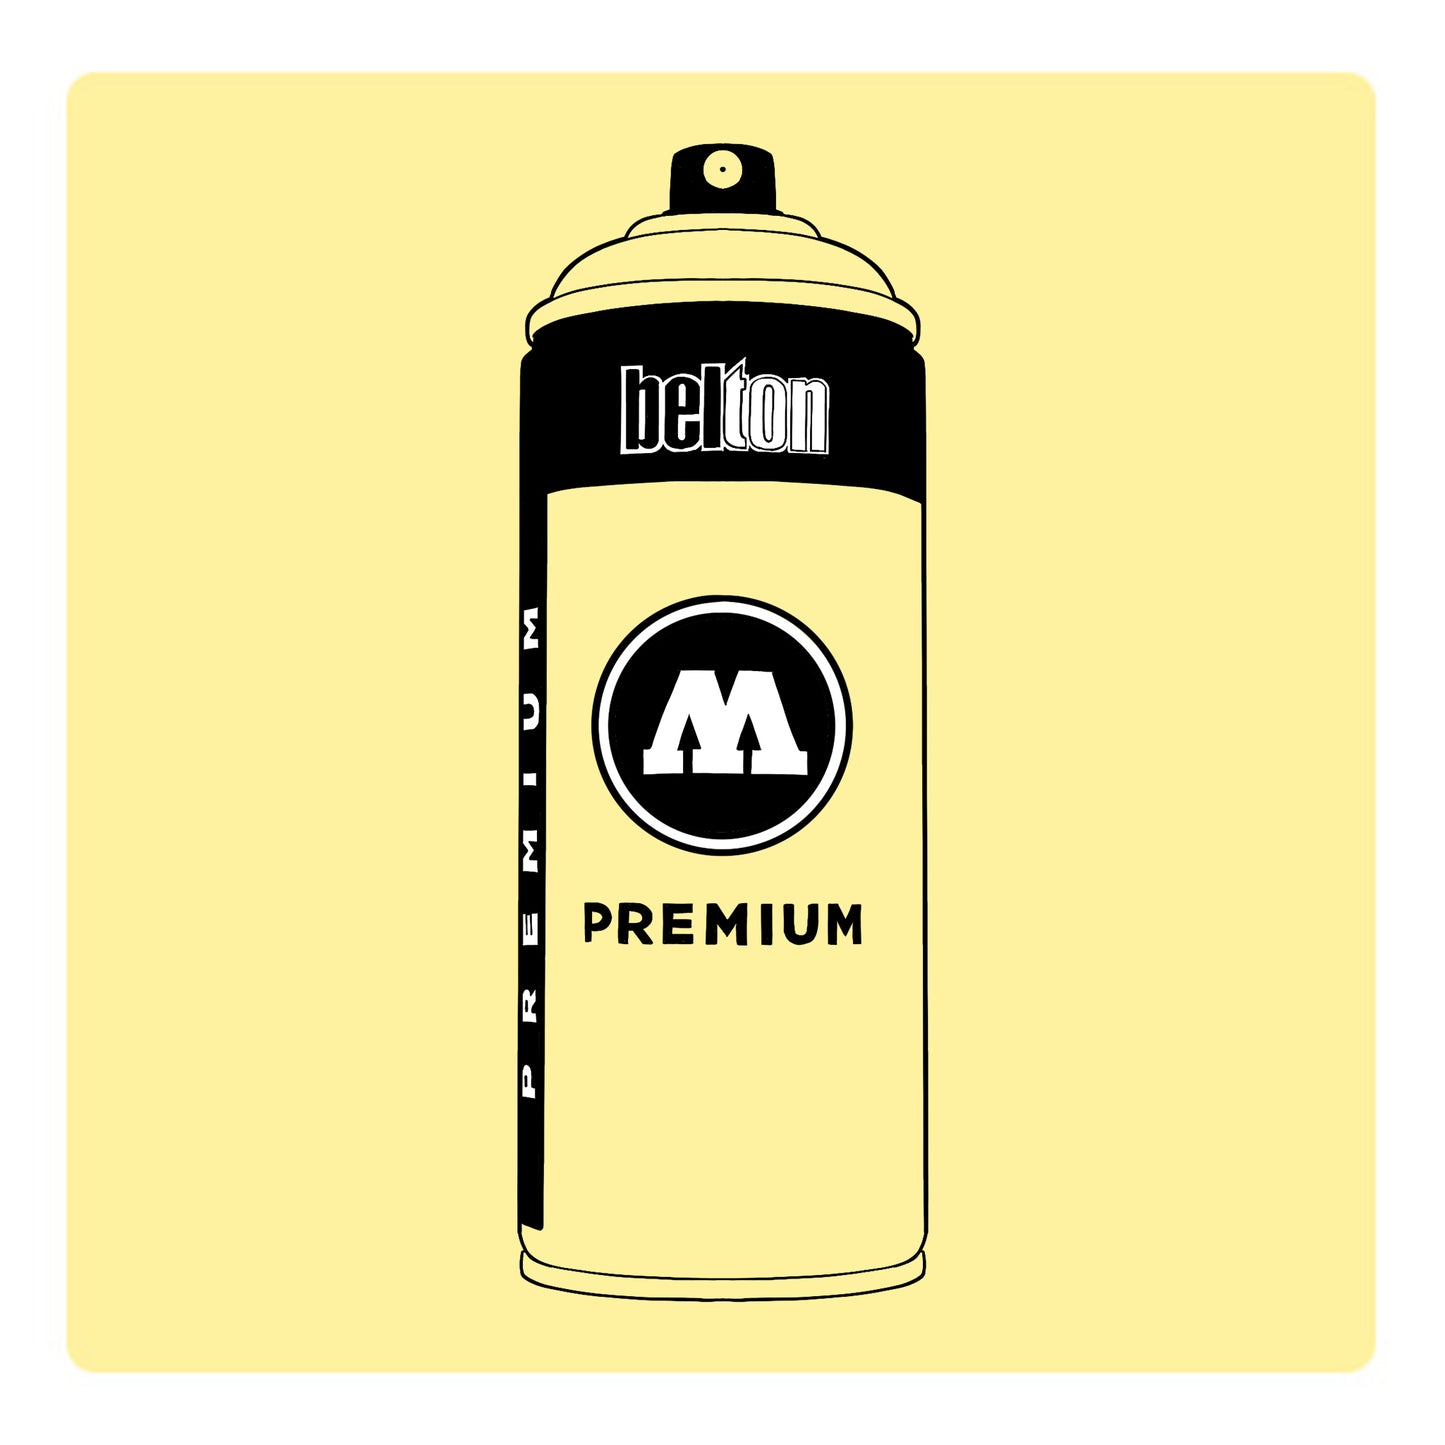 A black outline drawing of a light pastel yellow spray paint can with the words "belton","premium" and the letter"M" written on the face in black and white font. The background is a color swatch of the same light pastel yellow with a white border.